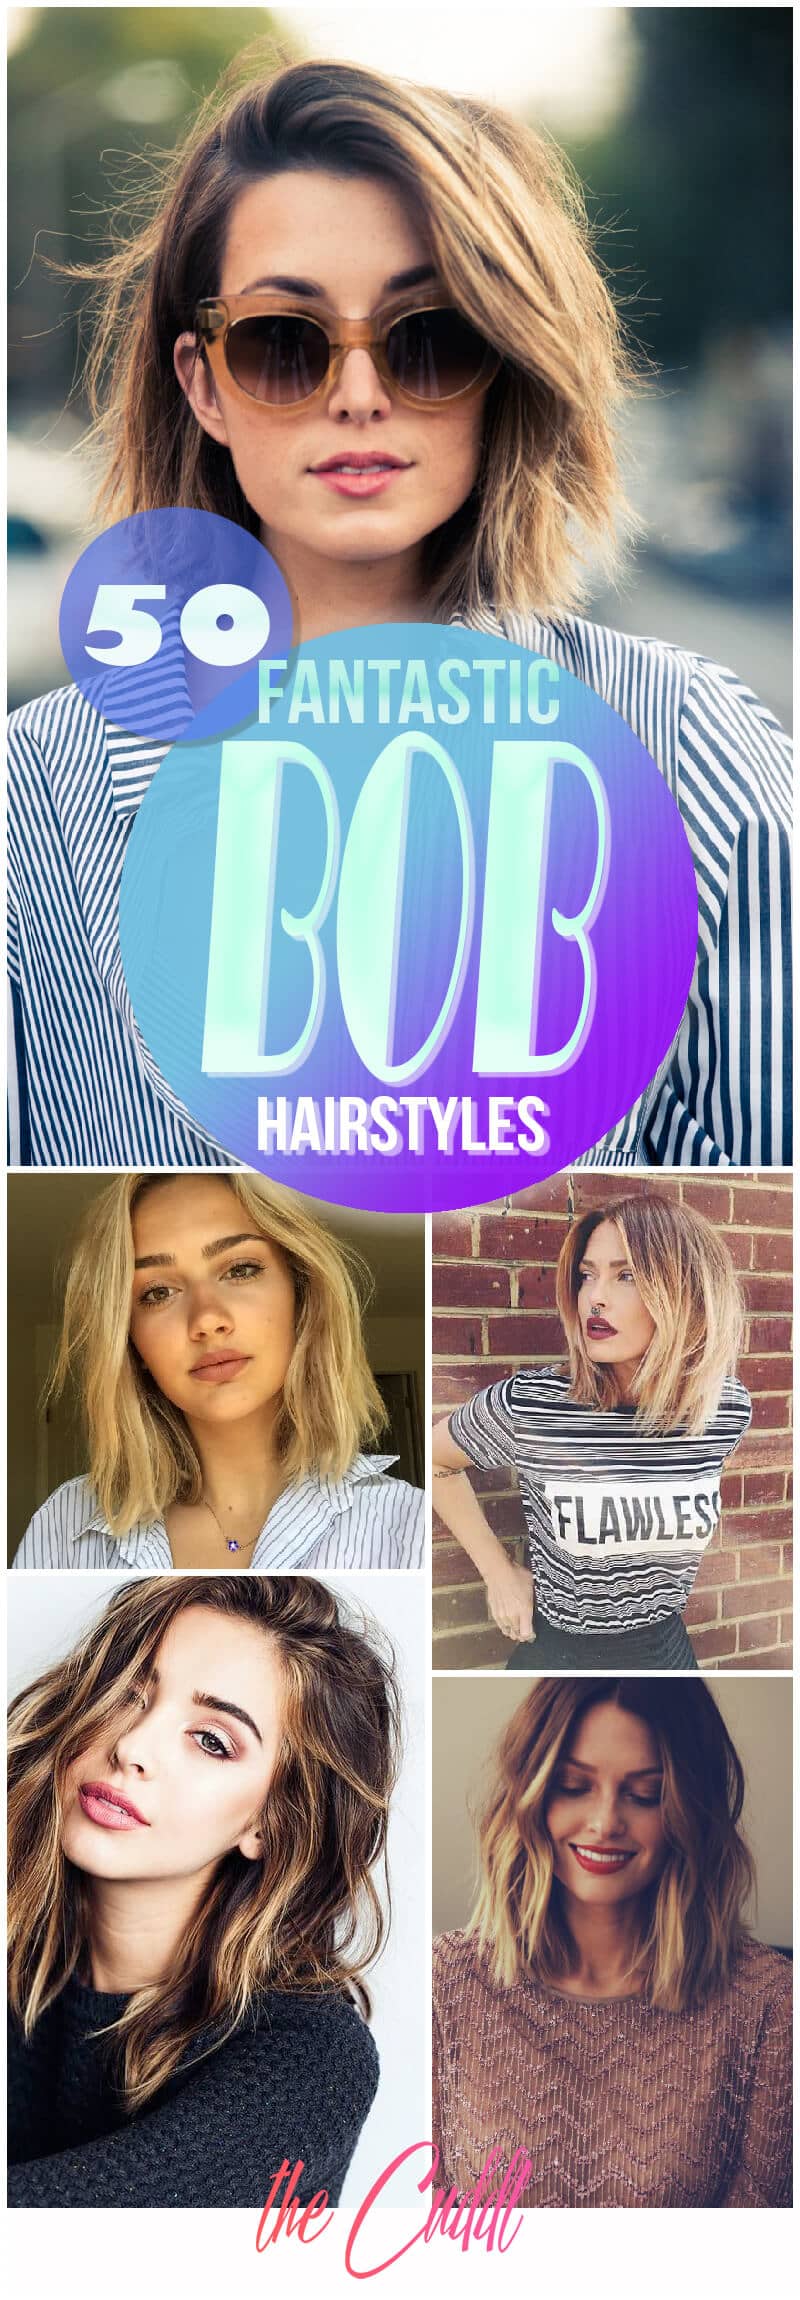 50 Stunning Bob Hairstyle Inspirations That Will Give You a Glammed Up Look